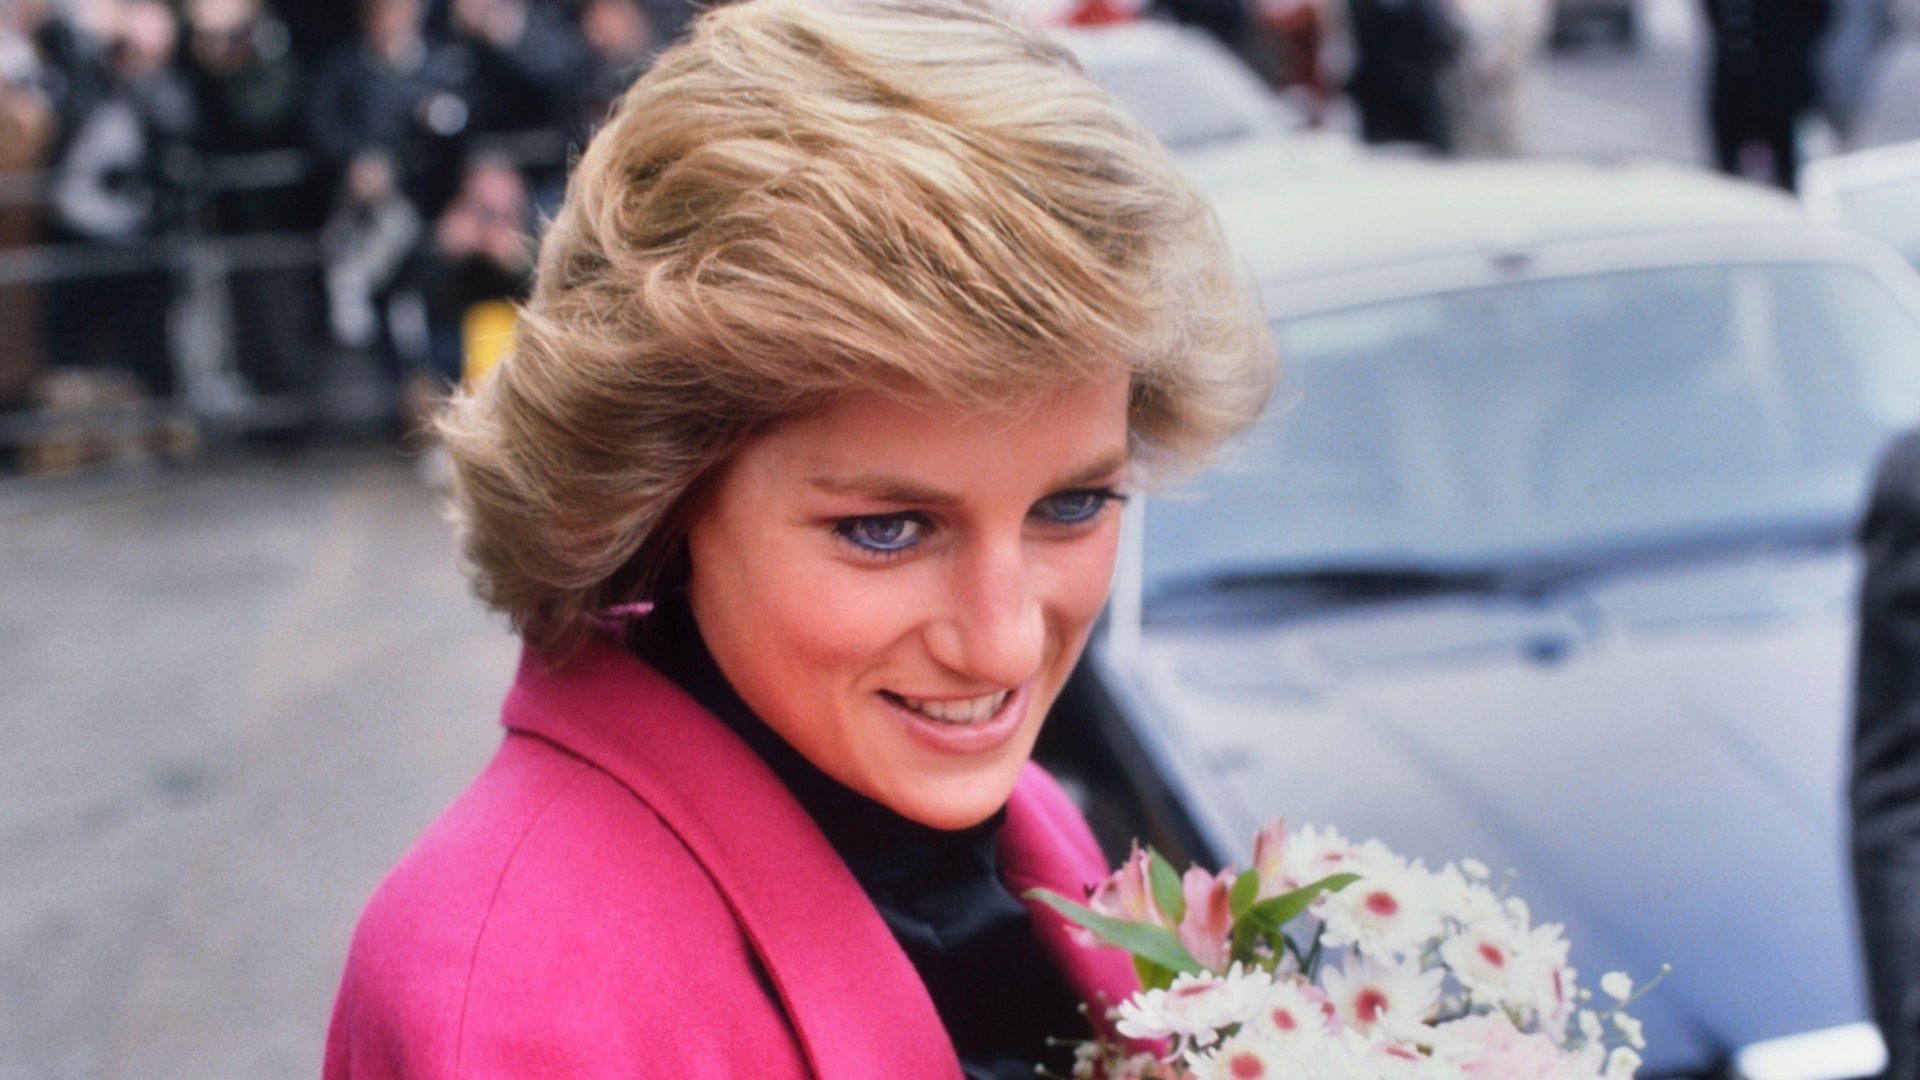 A Royal Rebel: How Princess Diana Defied Protocol for Harry and William